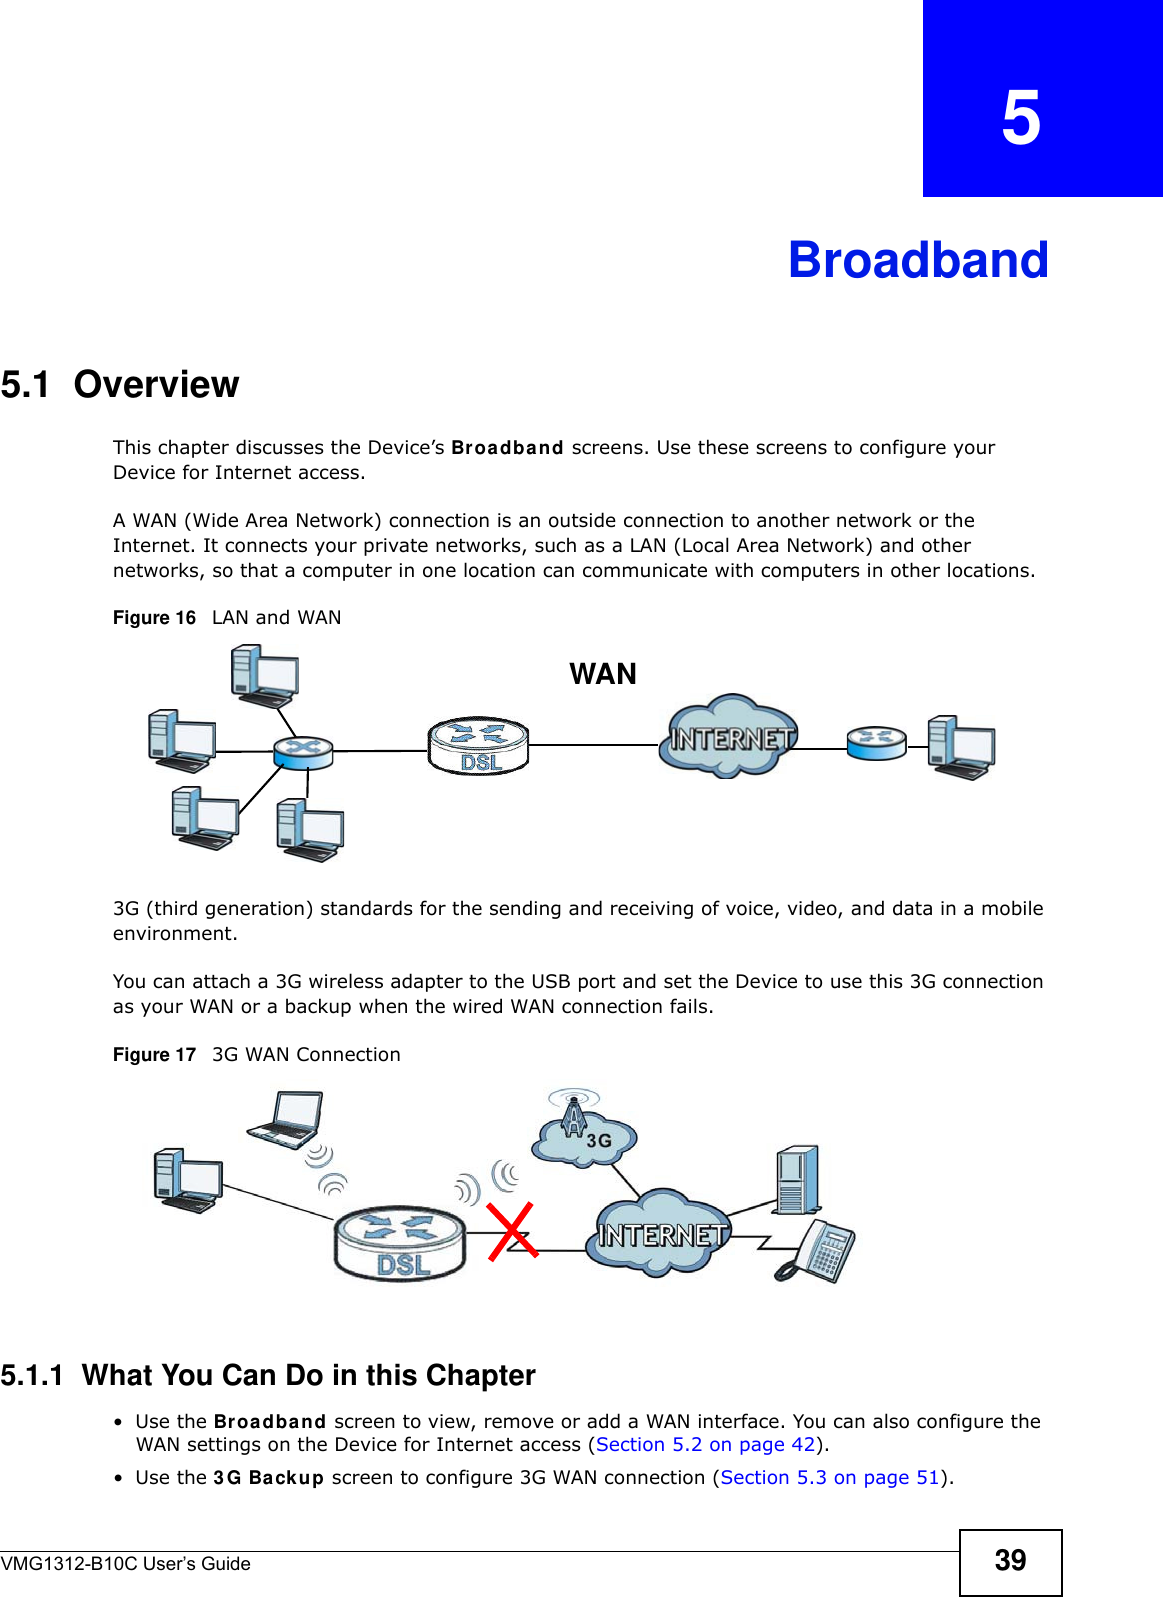 VMG1312-B10C User’s Guide 39CHAPTER   5Broadband5.1  OverviewThis chapter discusses the Device’s Broadba n d screens. Use these screens to configure your Device for Internet access.A WAN (Wide Area Network) connection is an outside connection to another network or the Internet. It connects your private networks, such as a LAN (Local Area Network) and other networks, so that a computer in one location can communicate with computers in other locations.Figure 16   LAN and WAN3G (third generation) standards for the sending and receiving of voice, video, and data in a mobile environment. You can attach a 3G wireless adapter to the USB port and set the Device to use this 3G connection as your WAN or a backup when the wired WAN connection fails.Figure 17   3G WAN Connection 5.1.1  What You Can Do in this Chapter•Use the Broa dba n d screen to view, remove or add a WAN interface. You can also configure the WAN settings on the Device for Internet access (Section 5.2 on page 42).•Use the 3 G Ba ckup screen to configure 3G WAN connection (Section 5.3 on page 51). WAN